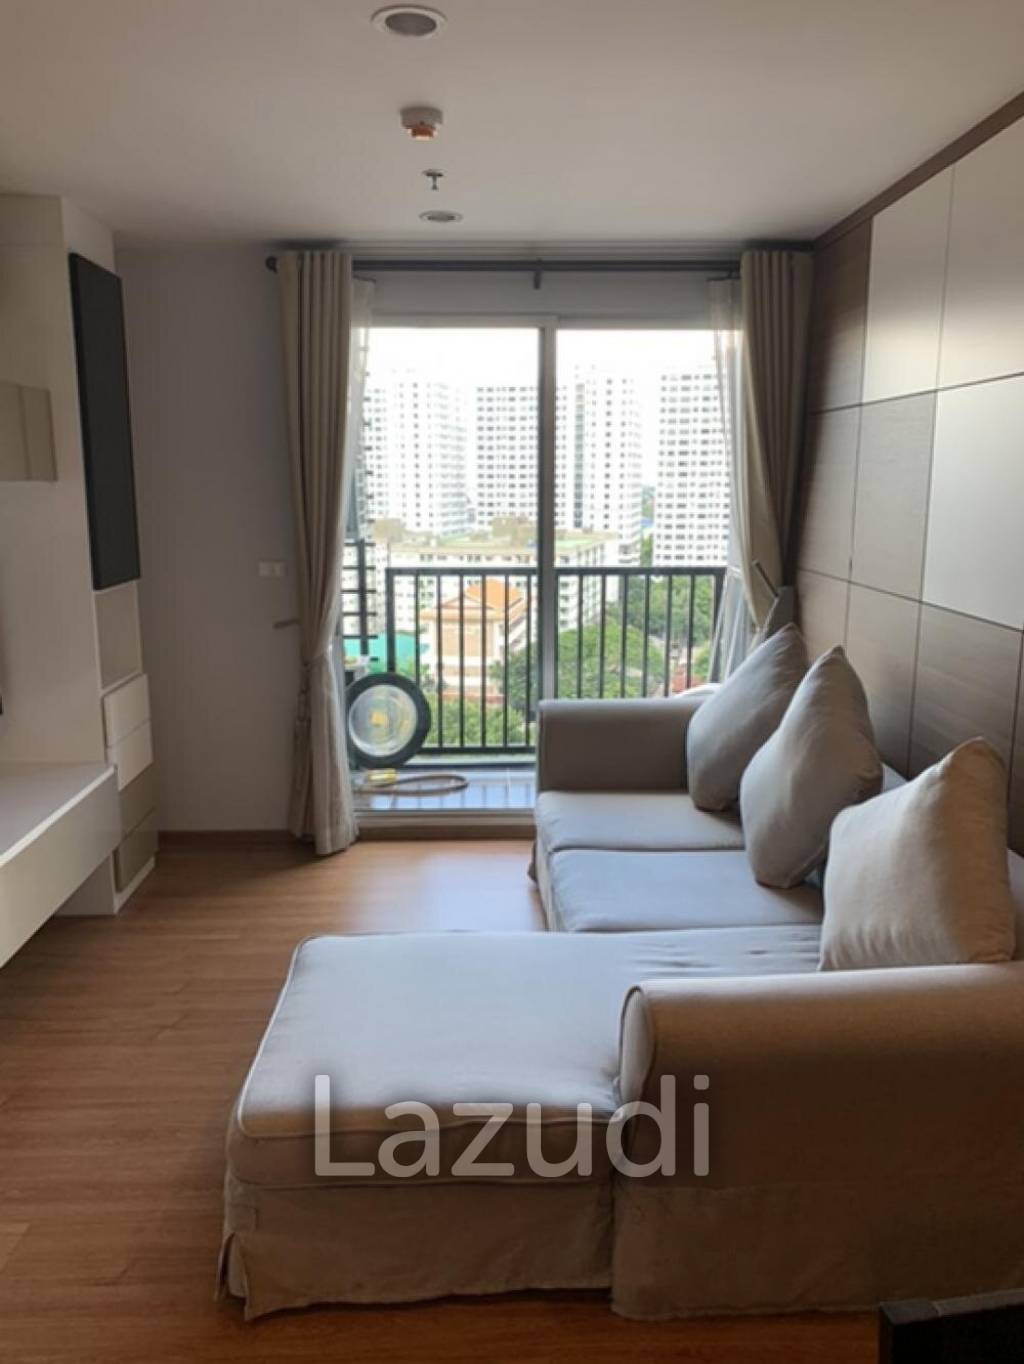 2 Bed 2 Bath 56.80 Sqm condo For Rent and Sale